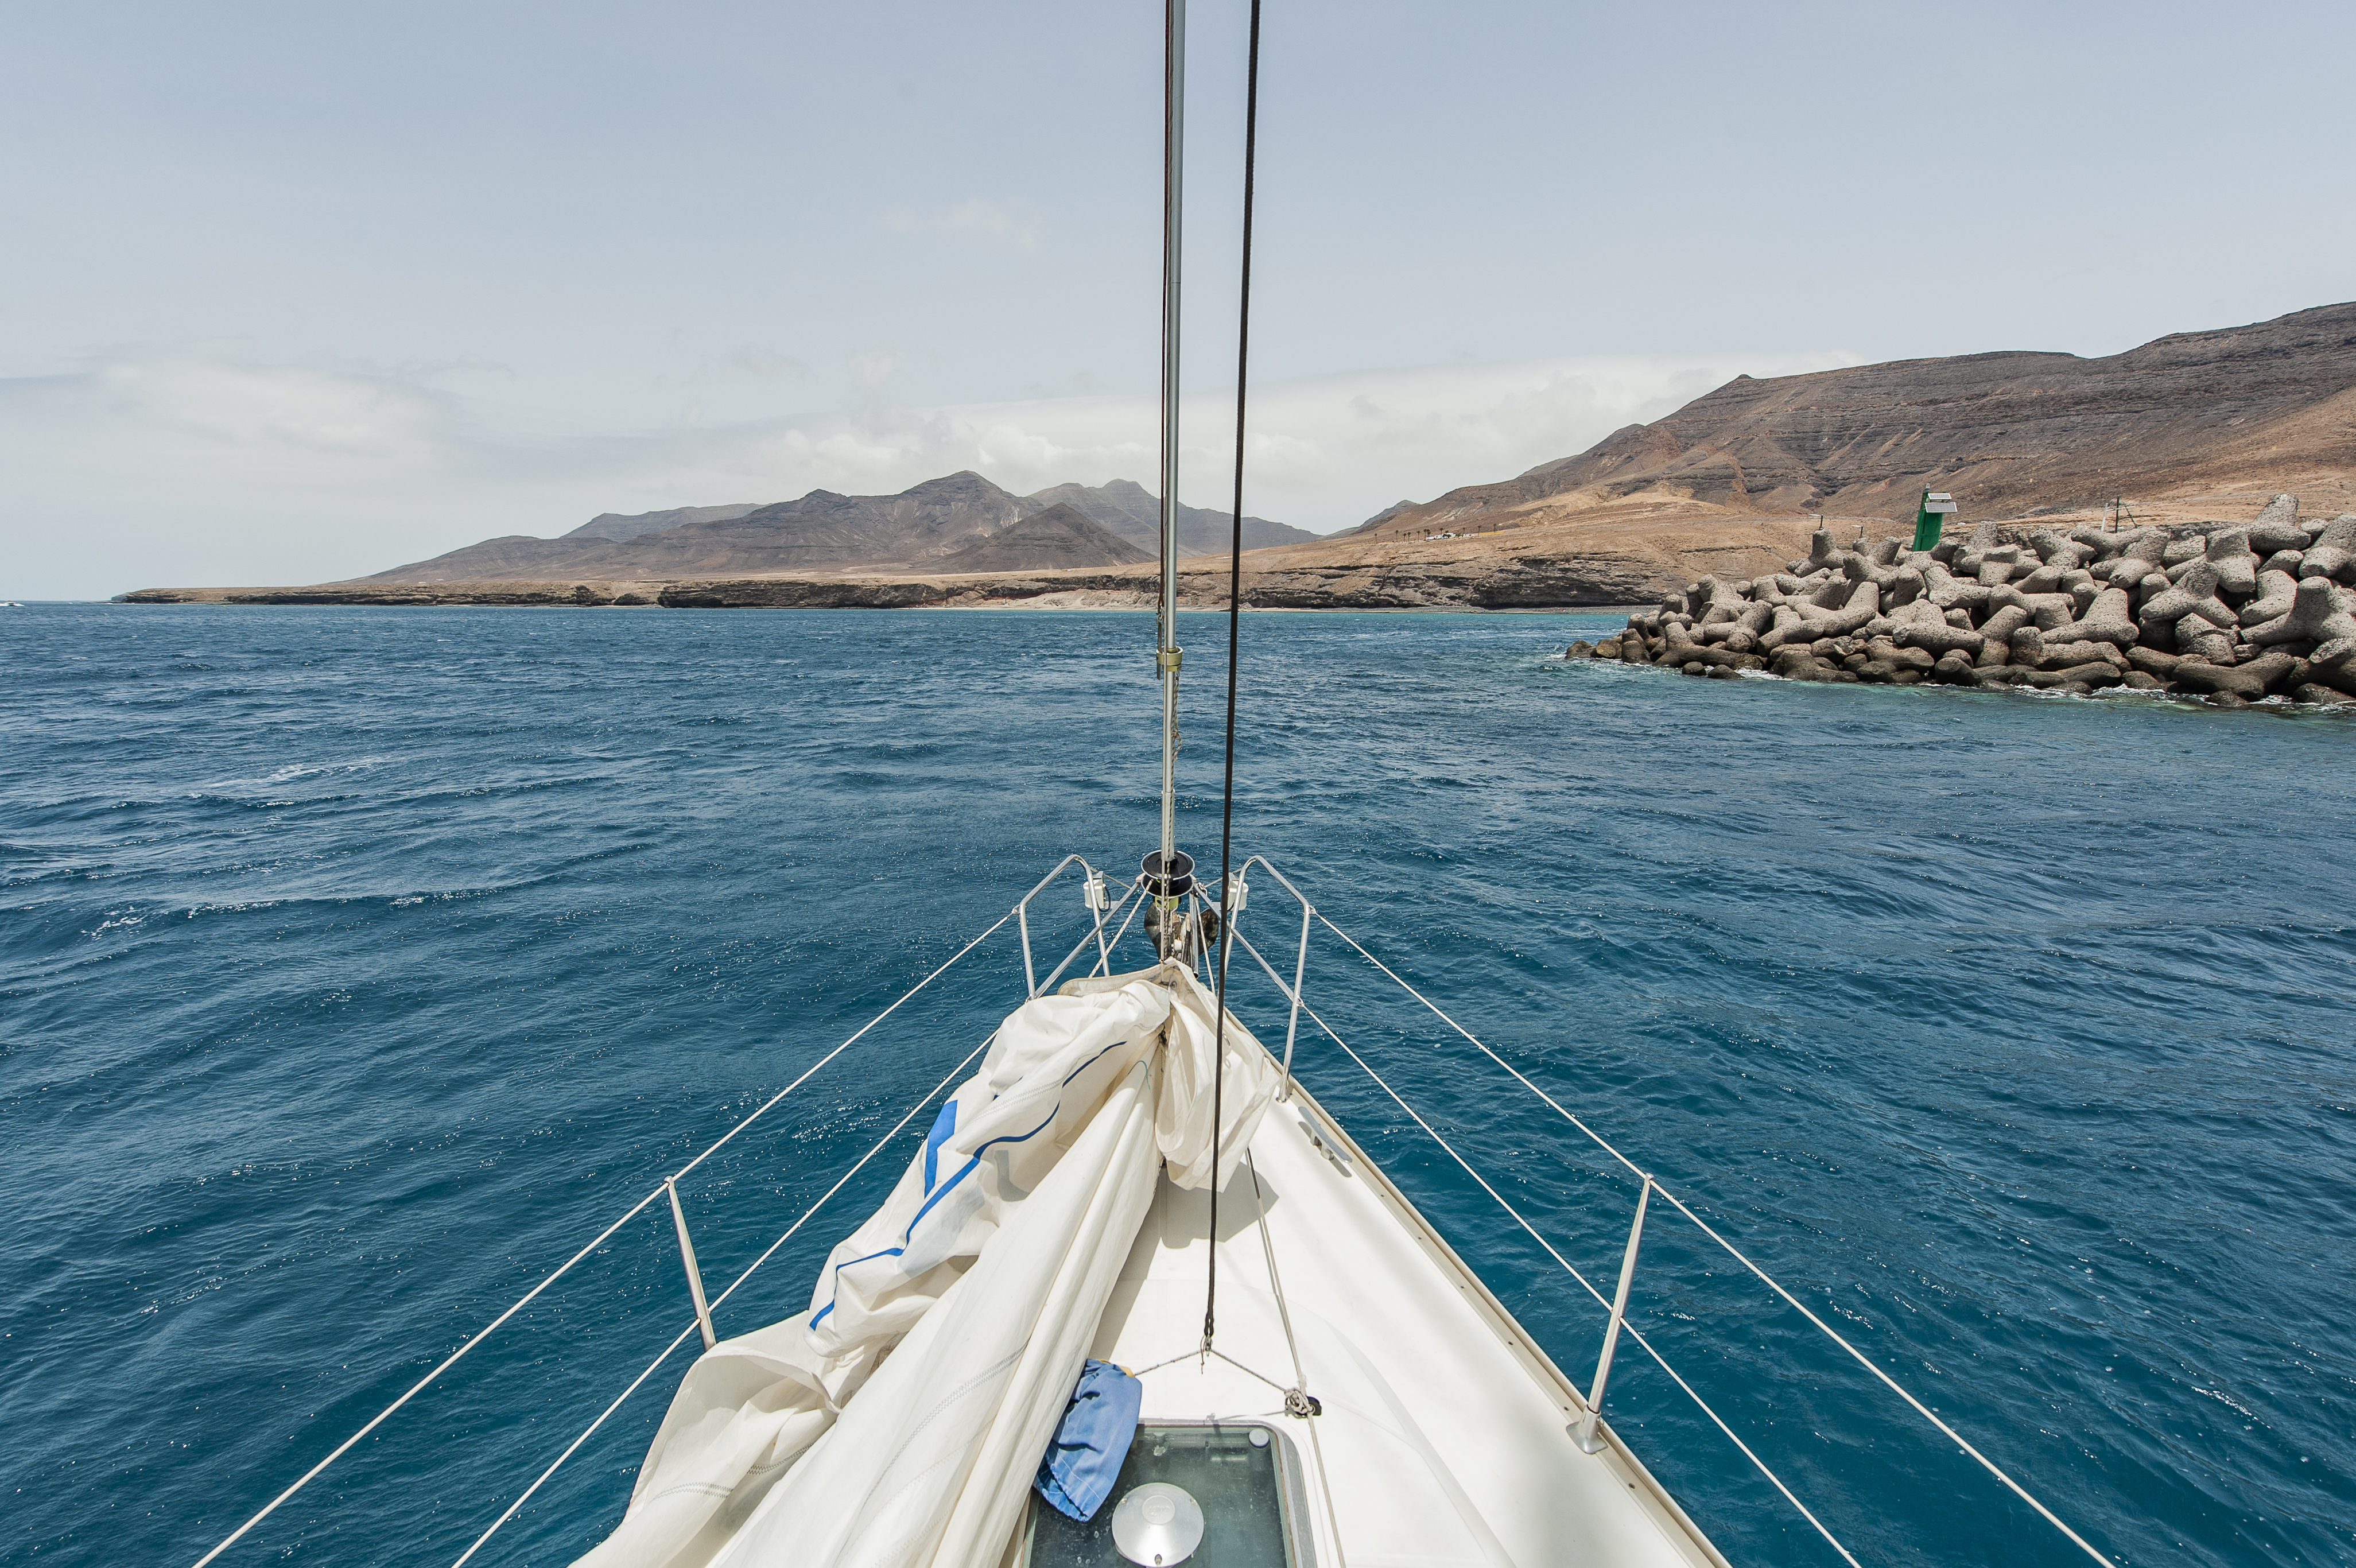 Cover for week sailing experience on the Canary Islands